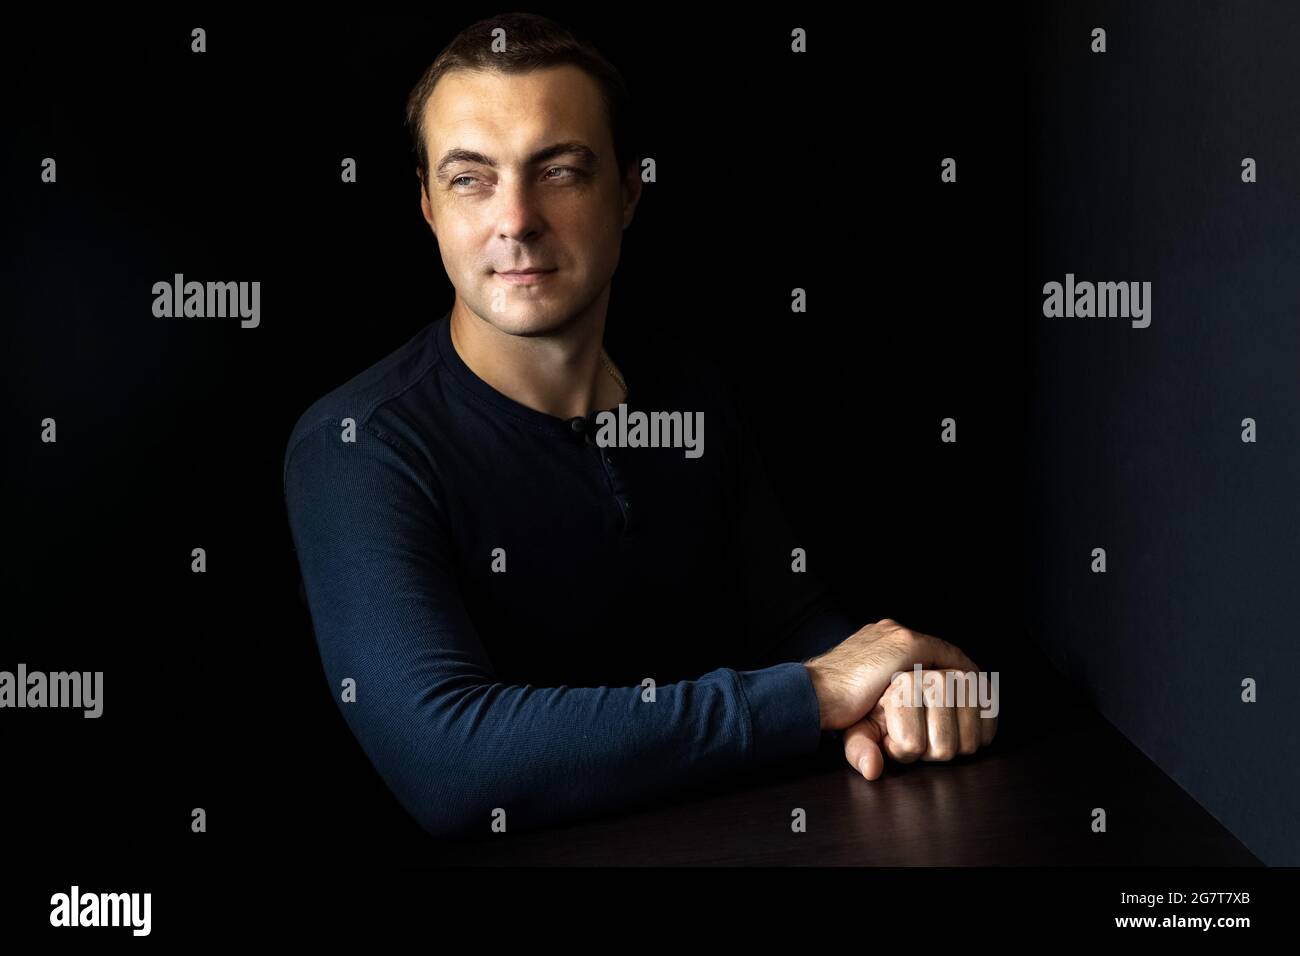 Portrait of a young man in a blue shirt in a dark key. Stock Photo